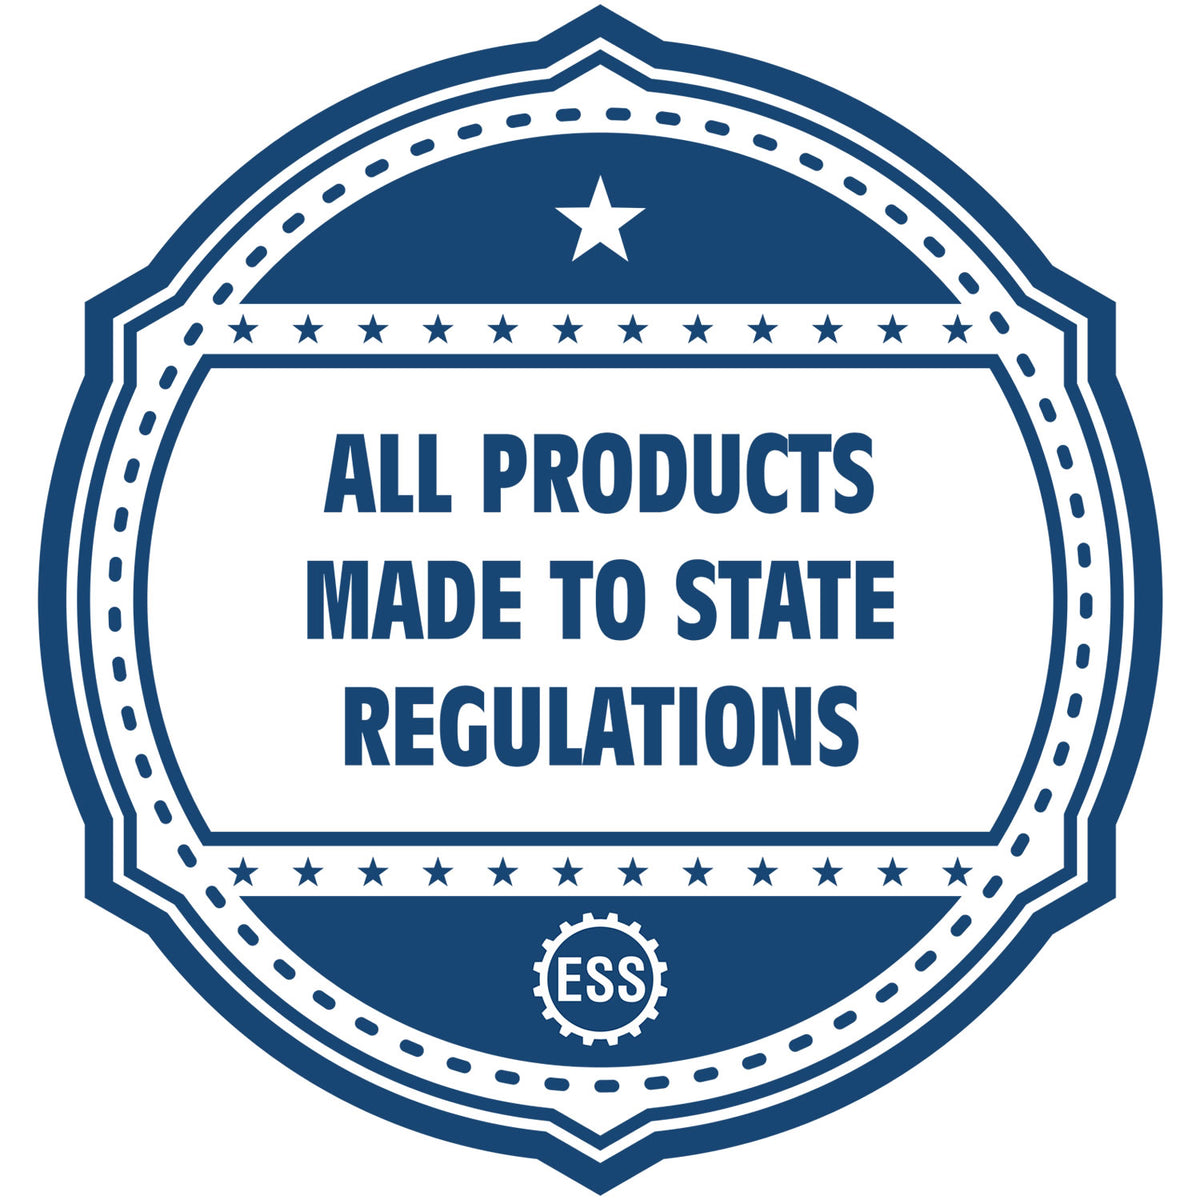 An icon or badge element for the PSI Delaware Notary Stamp showing that this product is made in compliance with state regulations.